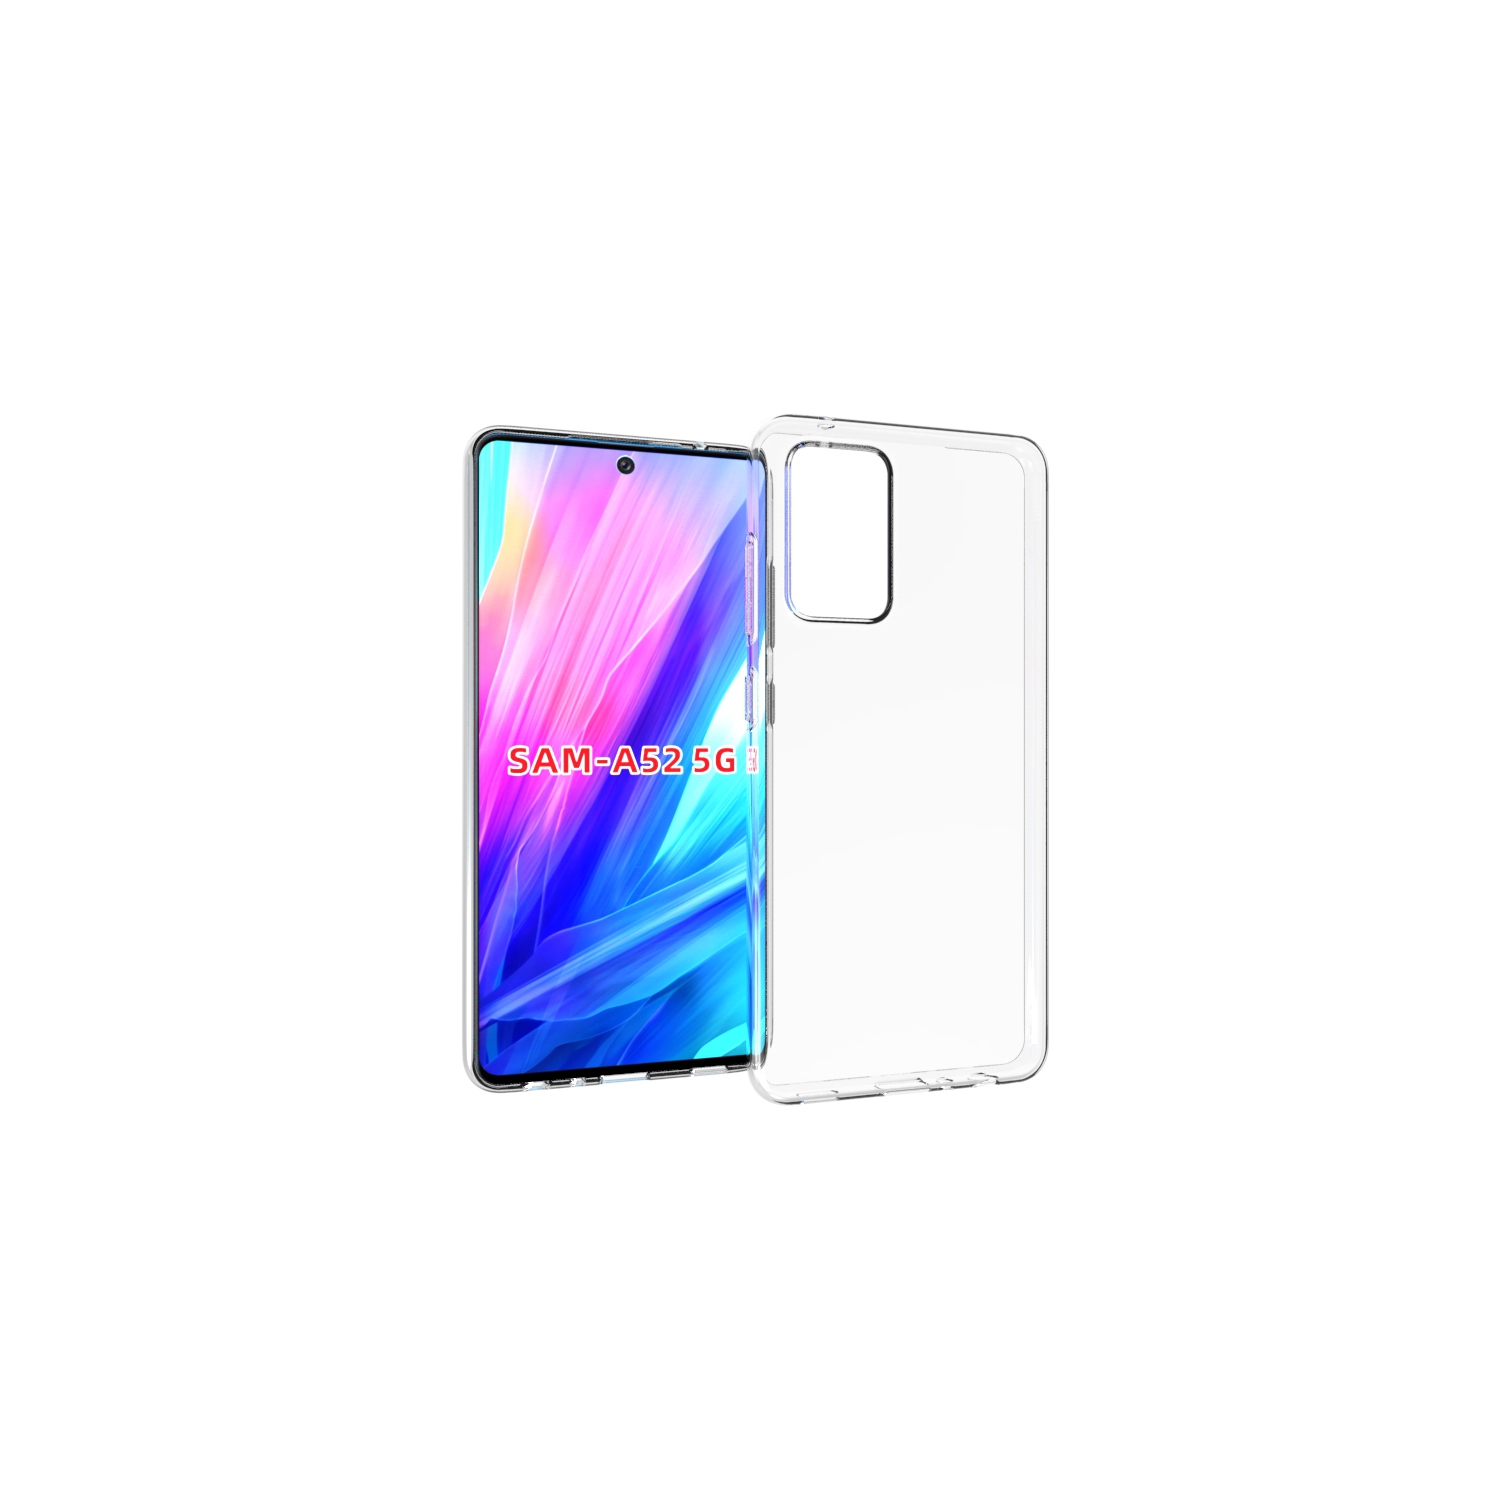 【CSmart】 Ultra Thin Soft TPU Silicone Jelly Bumper Back Cover Case for Samsung Galaxy A52 5G, Clear